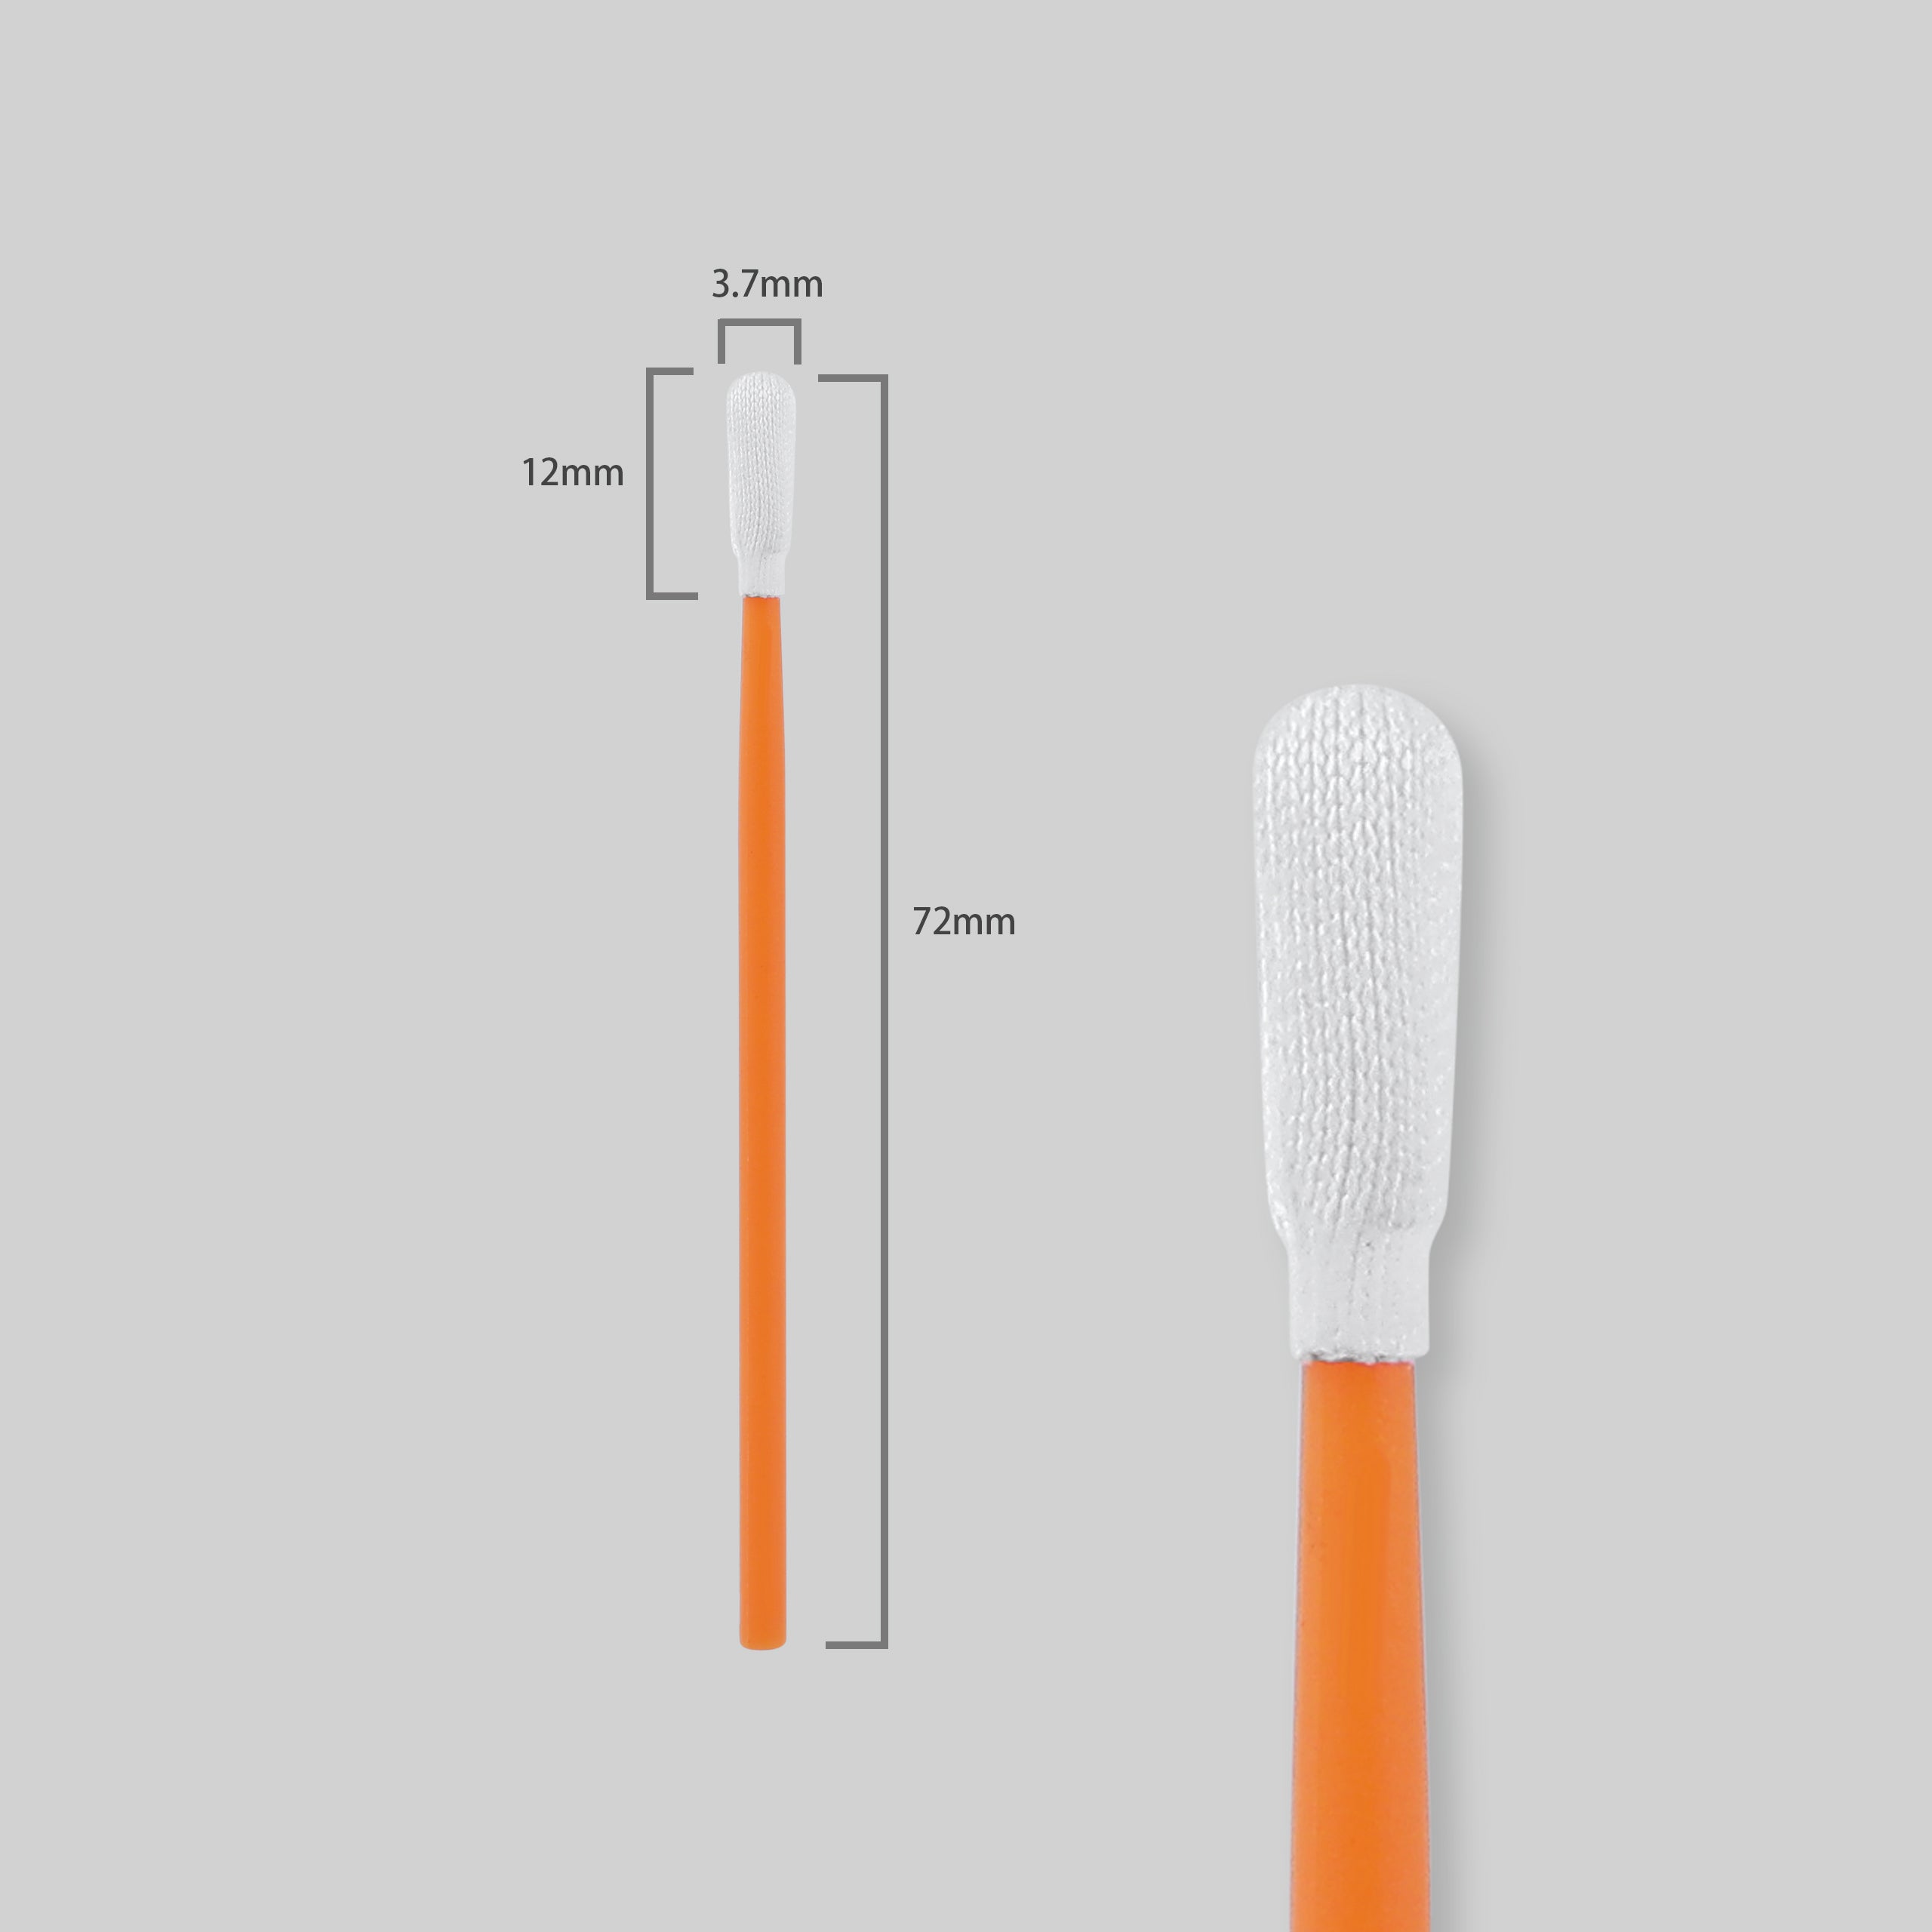 AAwipes swabs Head width/thickness/length=3.2/3.2/10.0 mm; Shaft width/thickness/length=2.8/2.8/62.0 mm. Total swab length=72 mm. They are produced and packed in Class 100-1000 Cleanroom, the Microfiber detailing swabs exhibit low particles and ion content, free from silicone and amide.